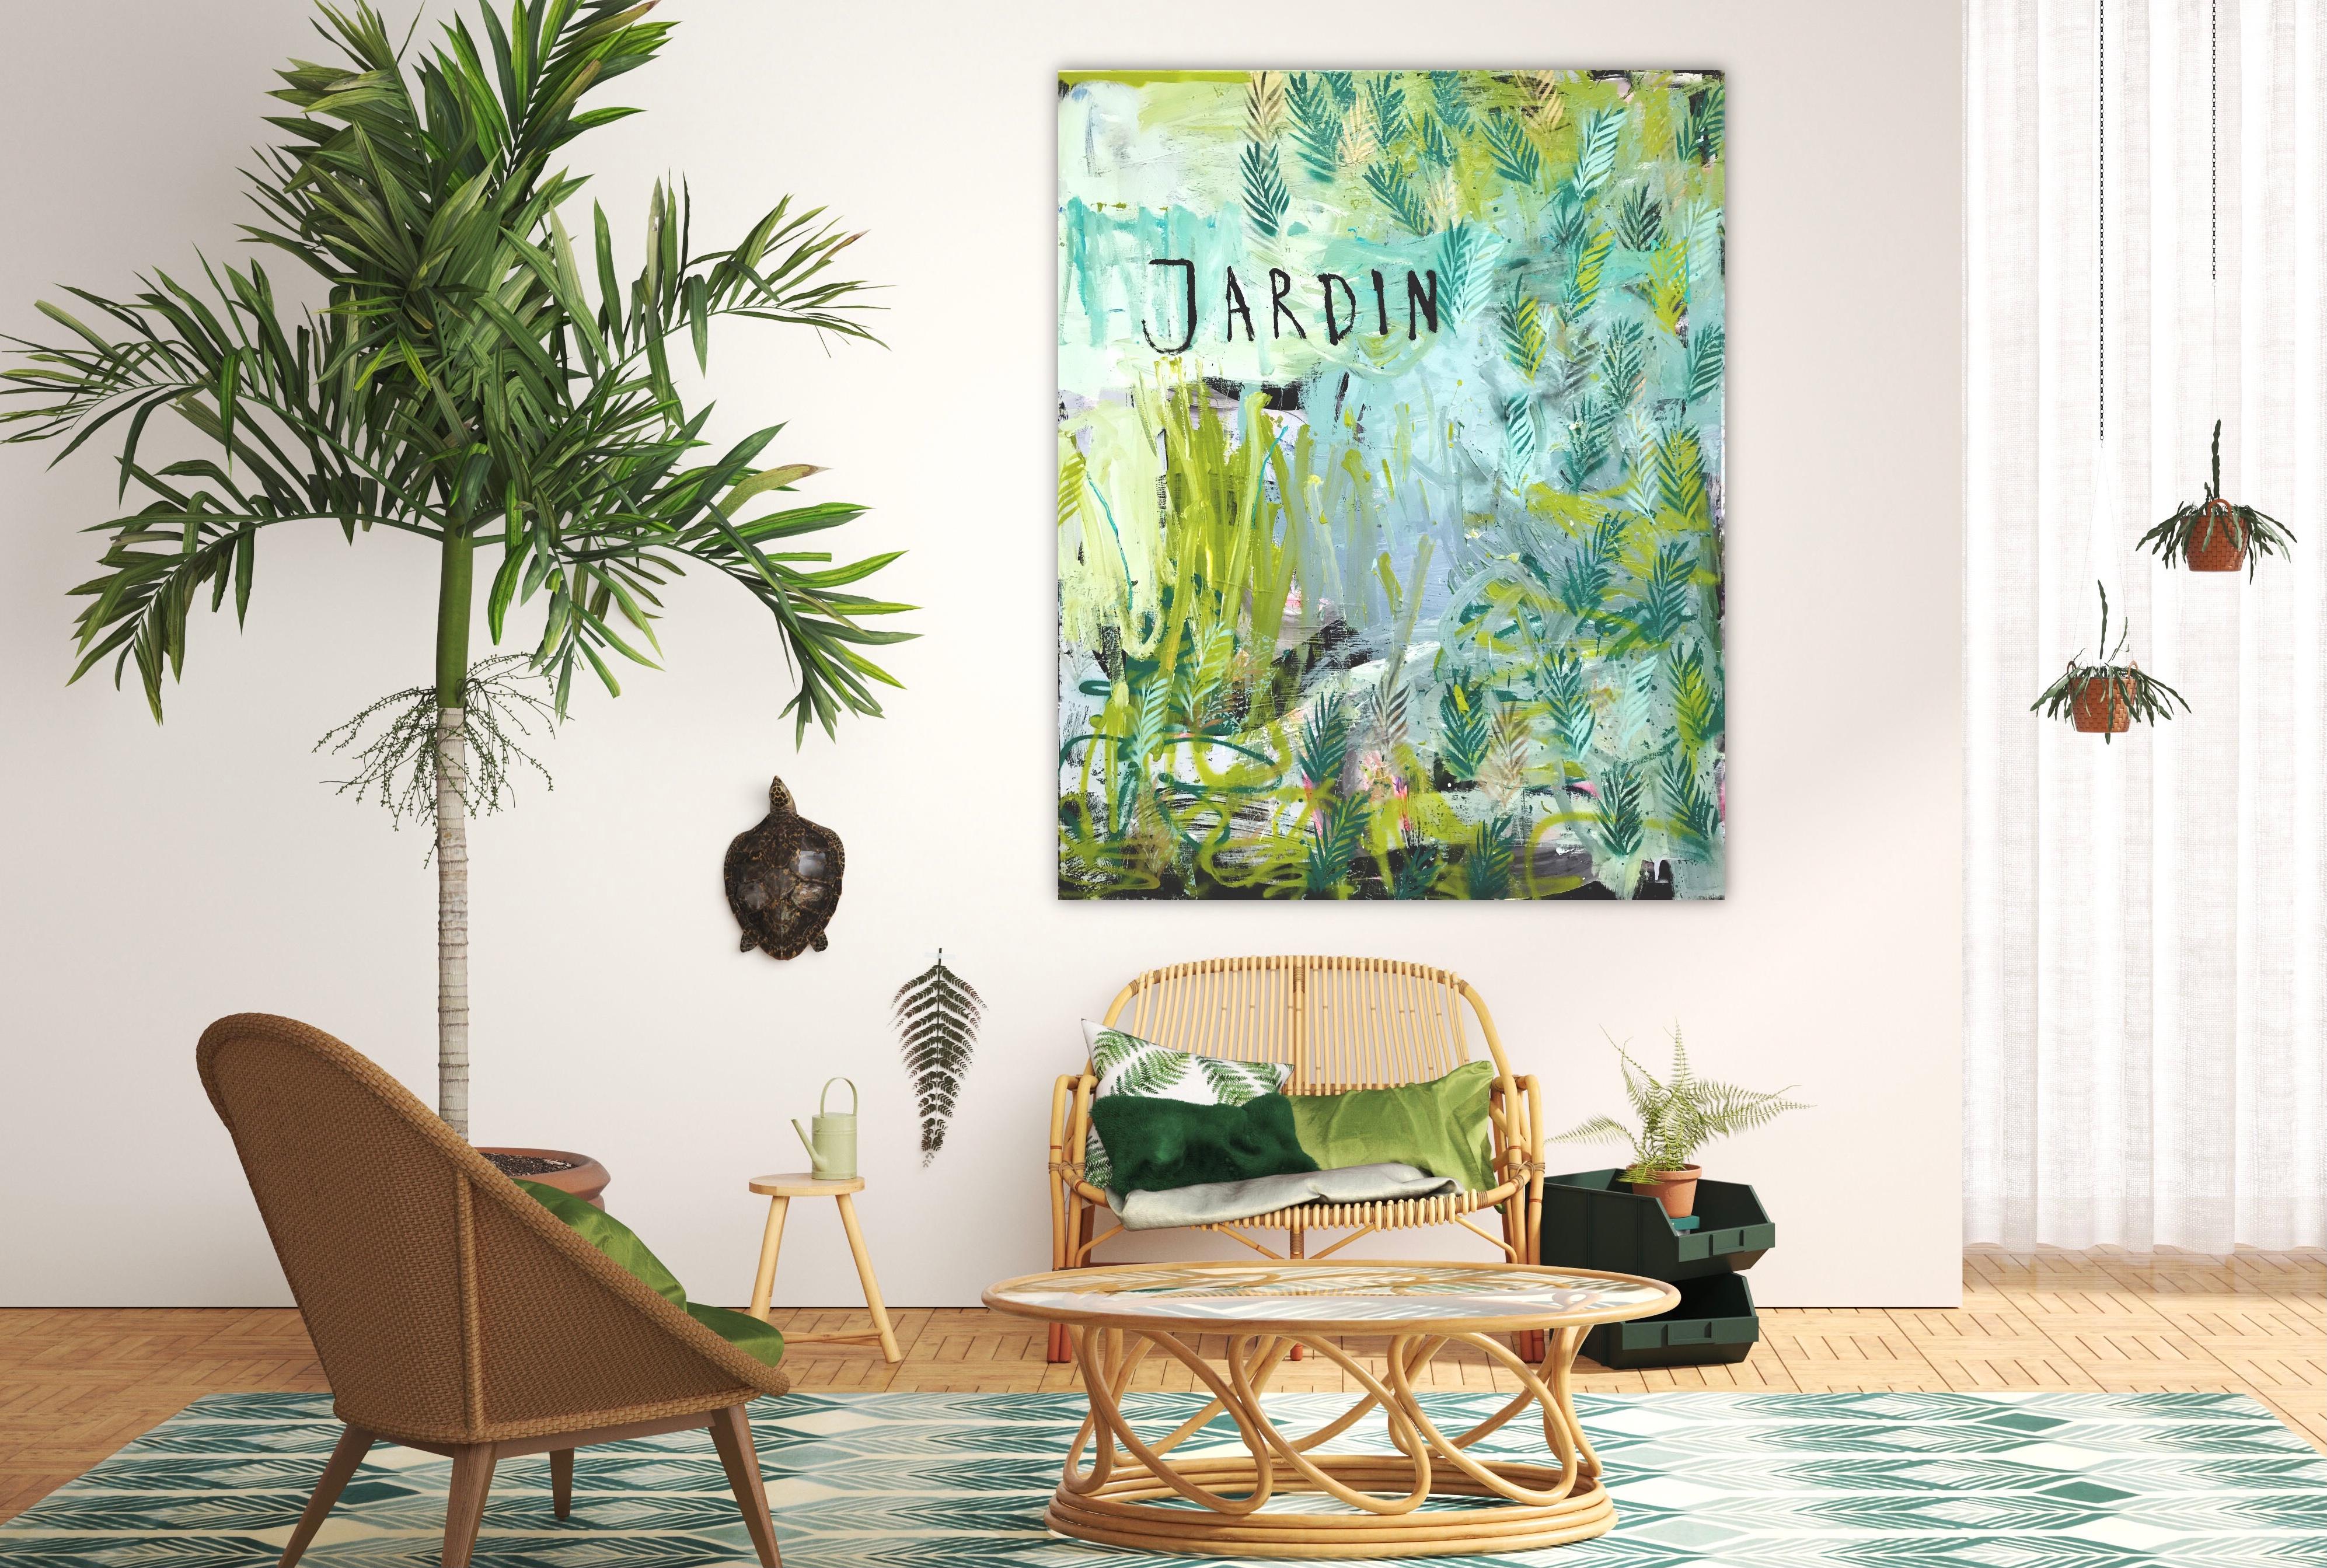 Jardin - Jungle, Garden, expressive painting, abstract, Contemporary Art, green For Sale 7